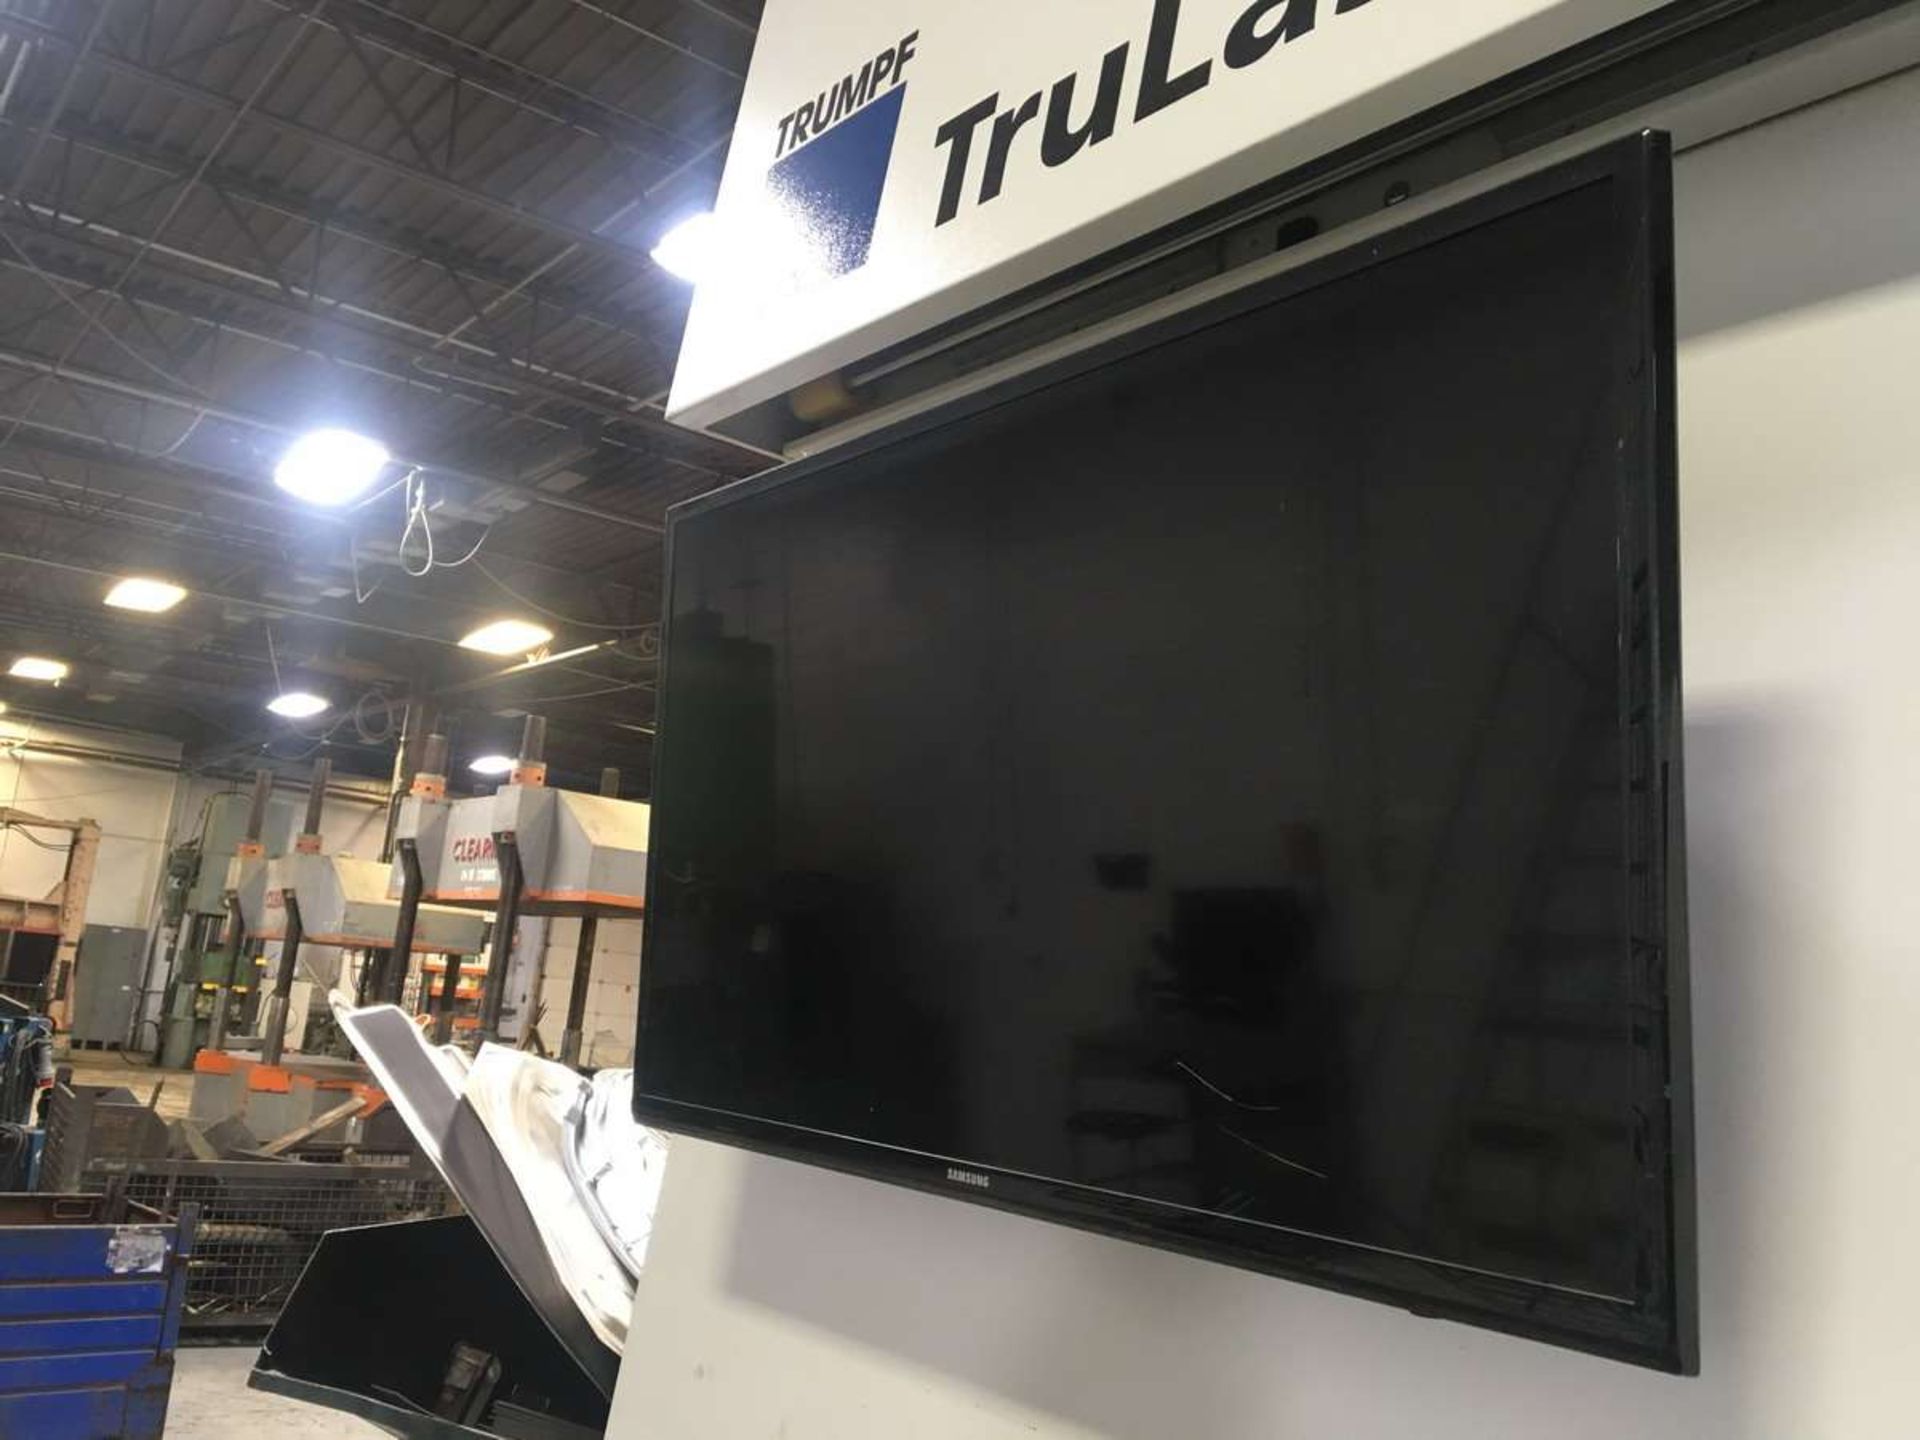 2015 Trumpf Tru Laser Cell 7040 Type L32 5-Axis CNC Laser Welding System - Image 19 of 20